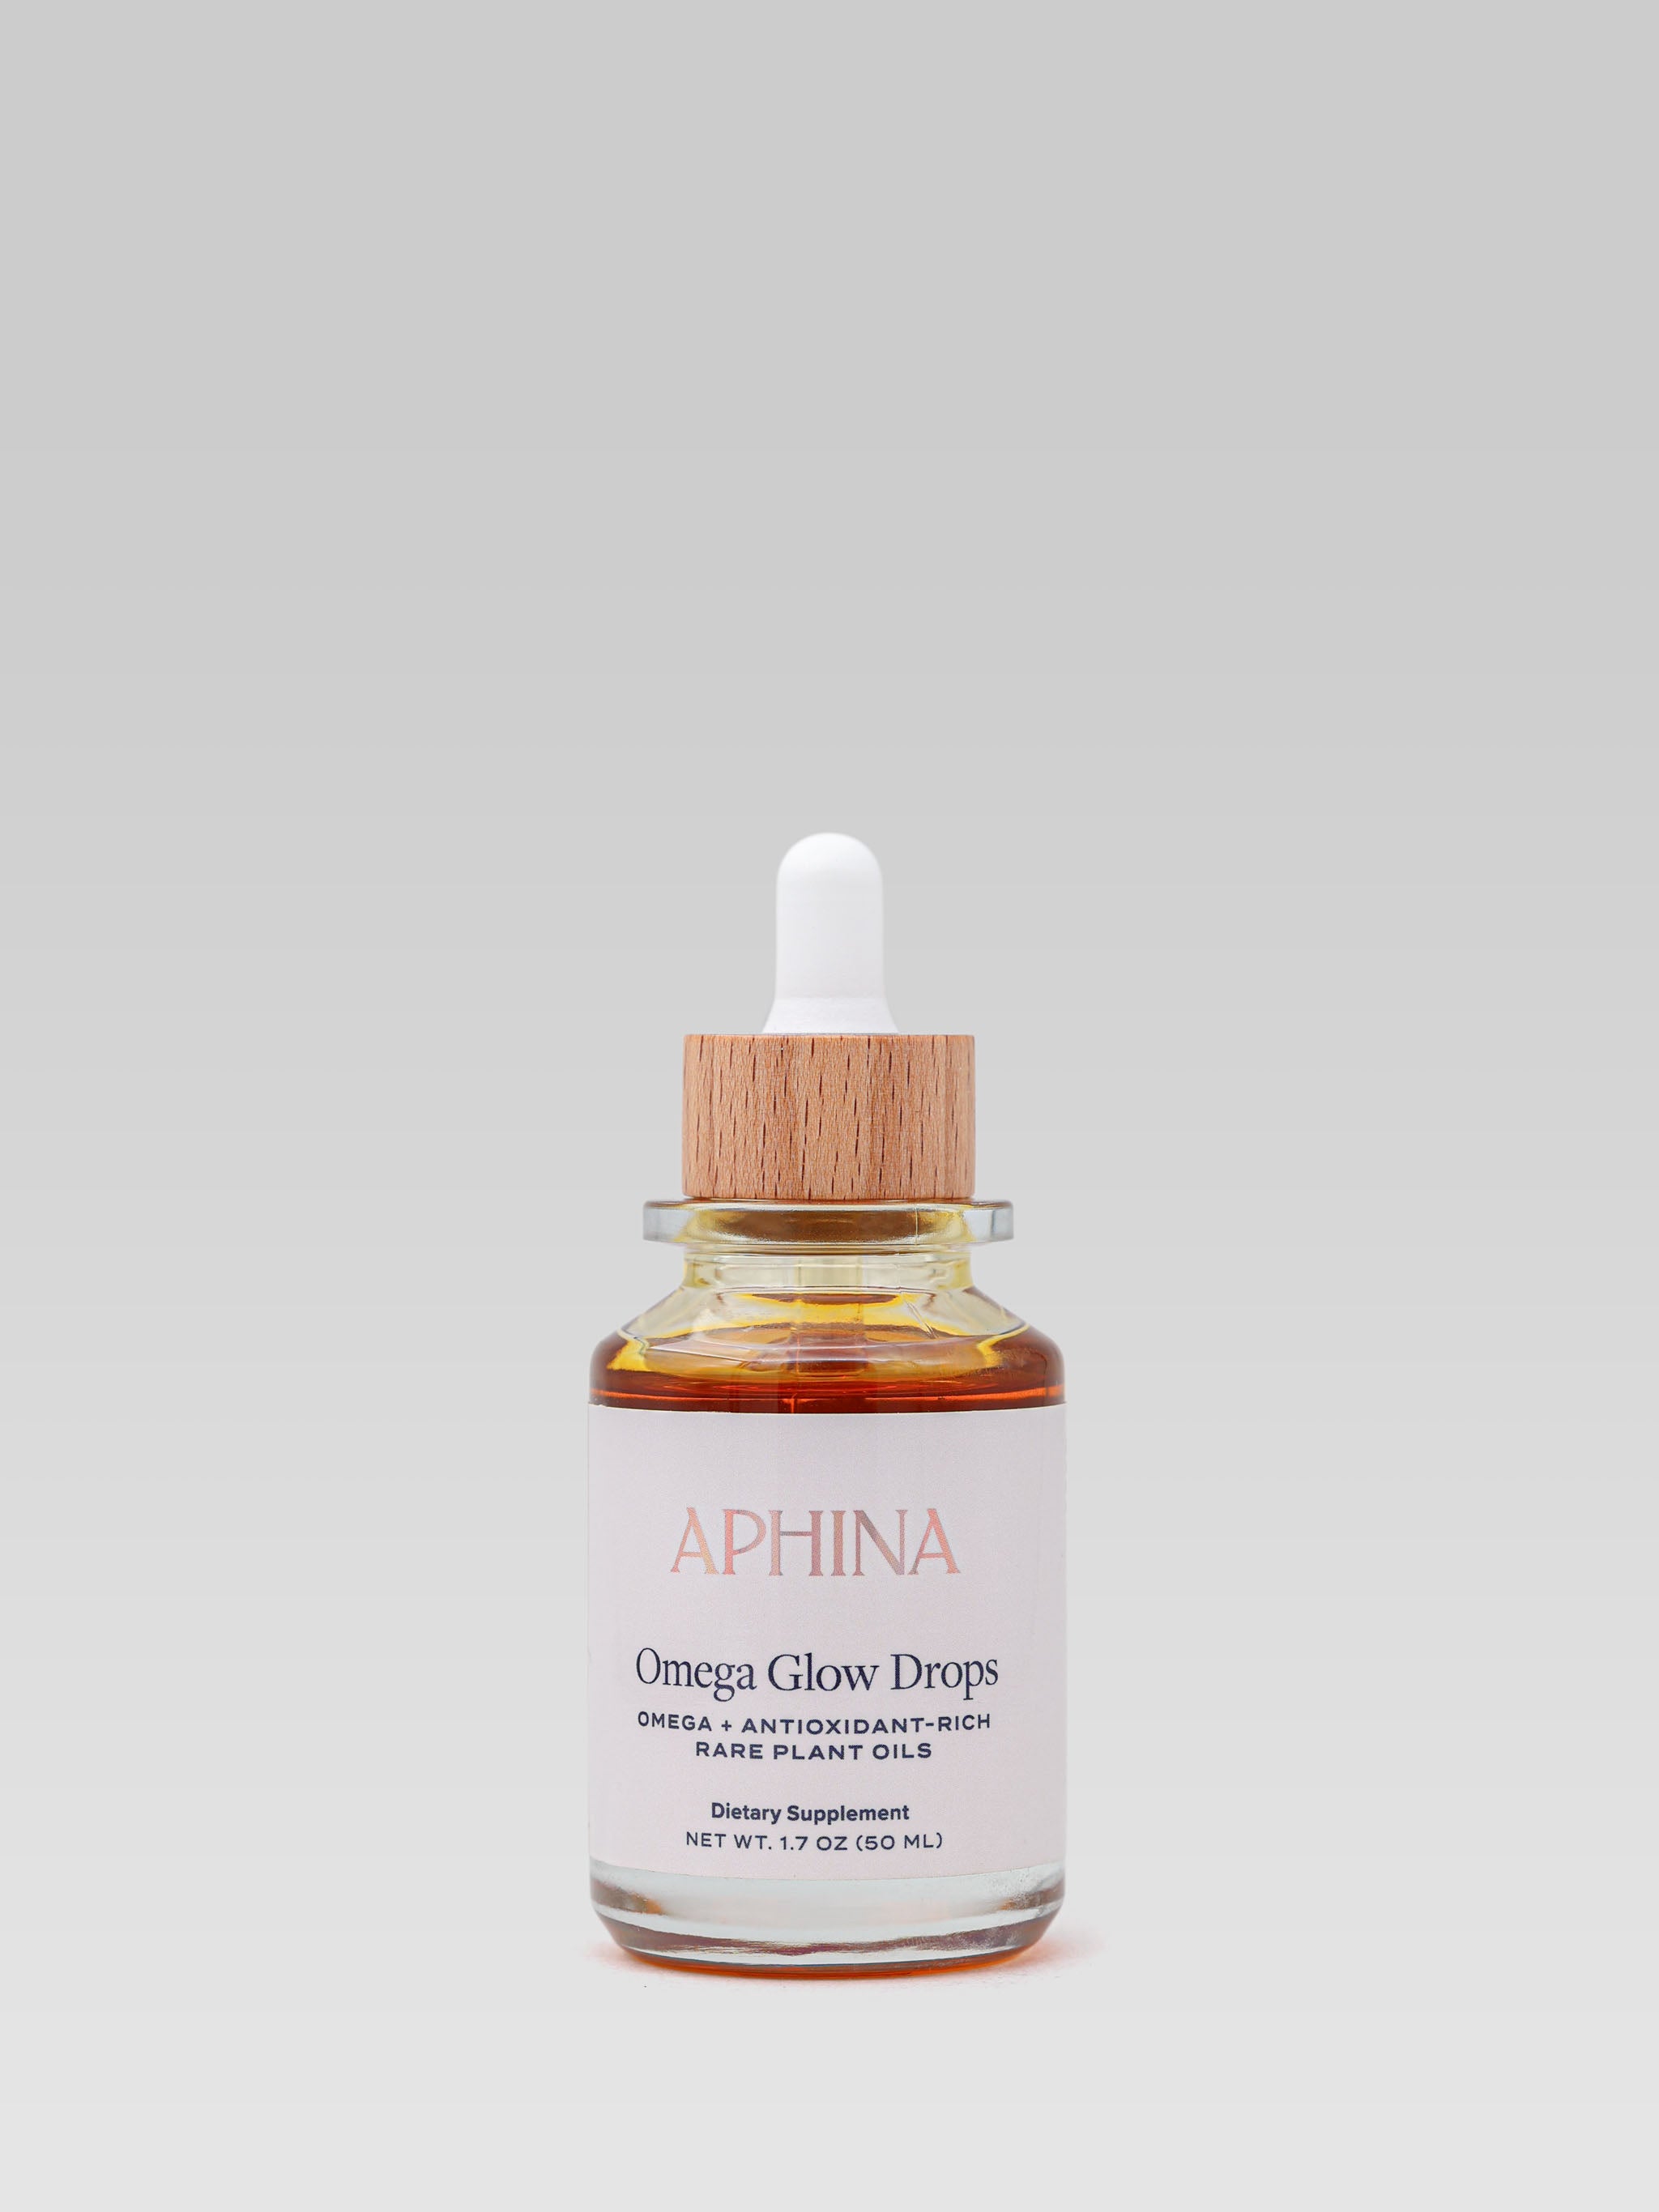 Aphina Omega Glow Drops product shot 